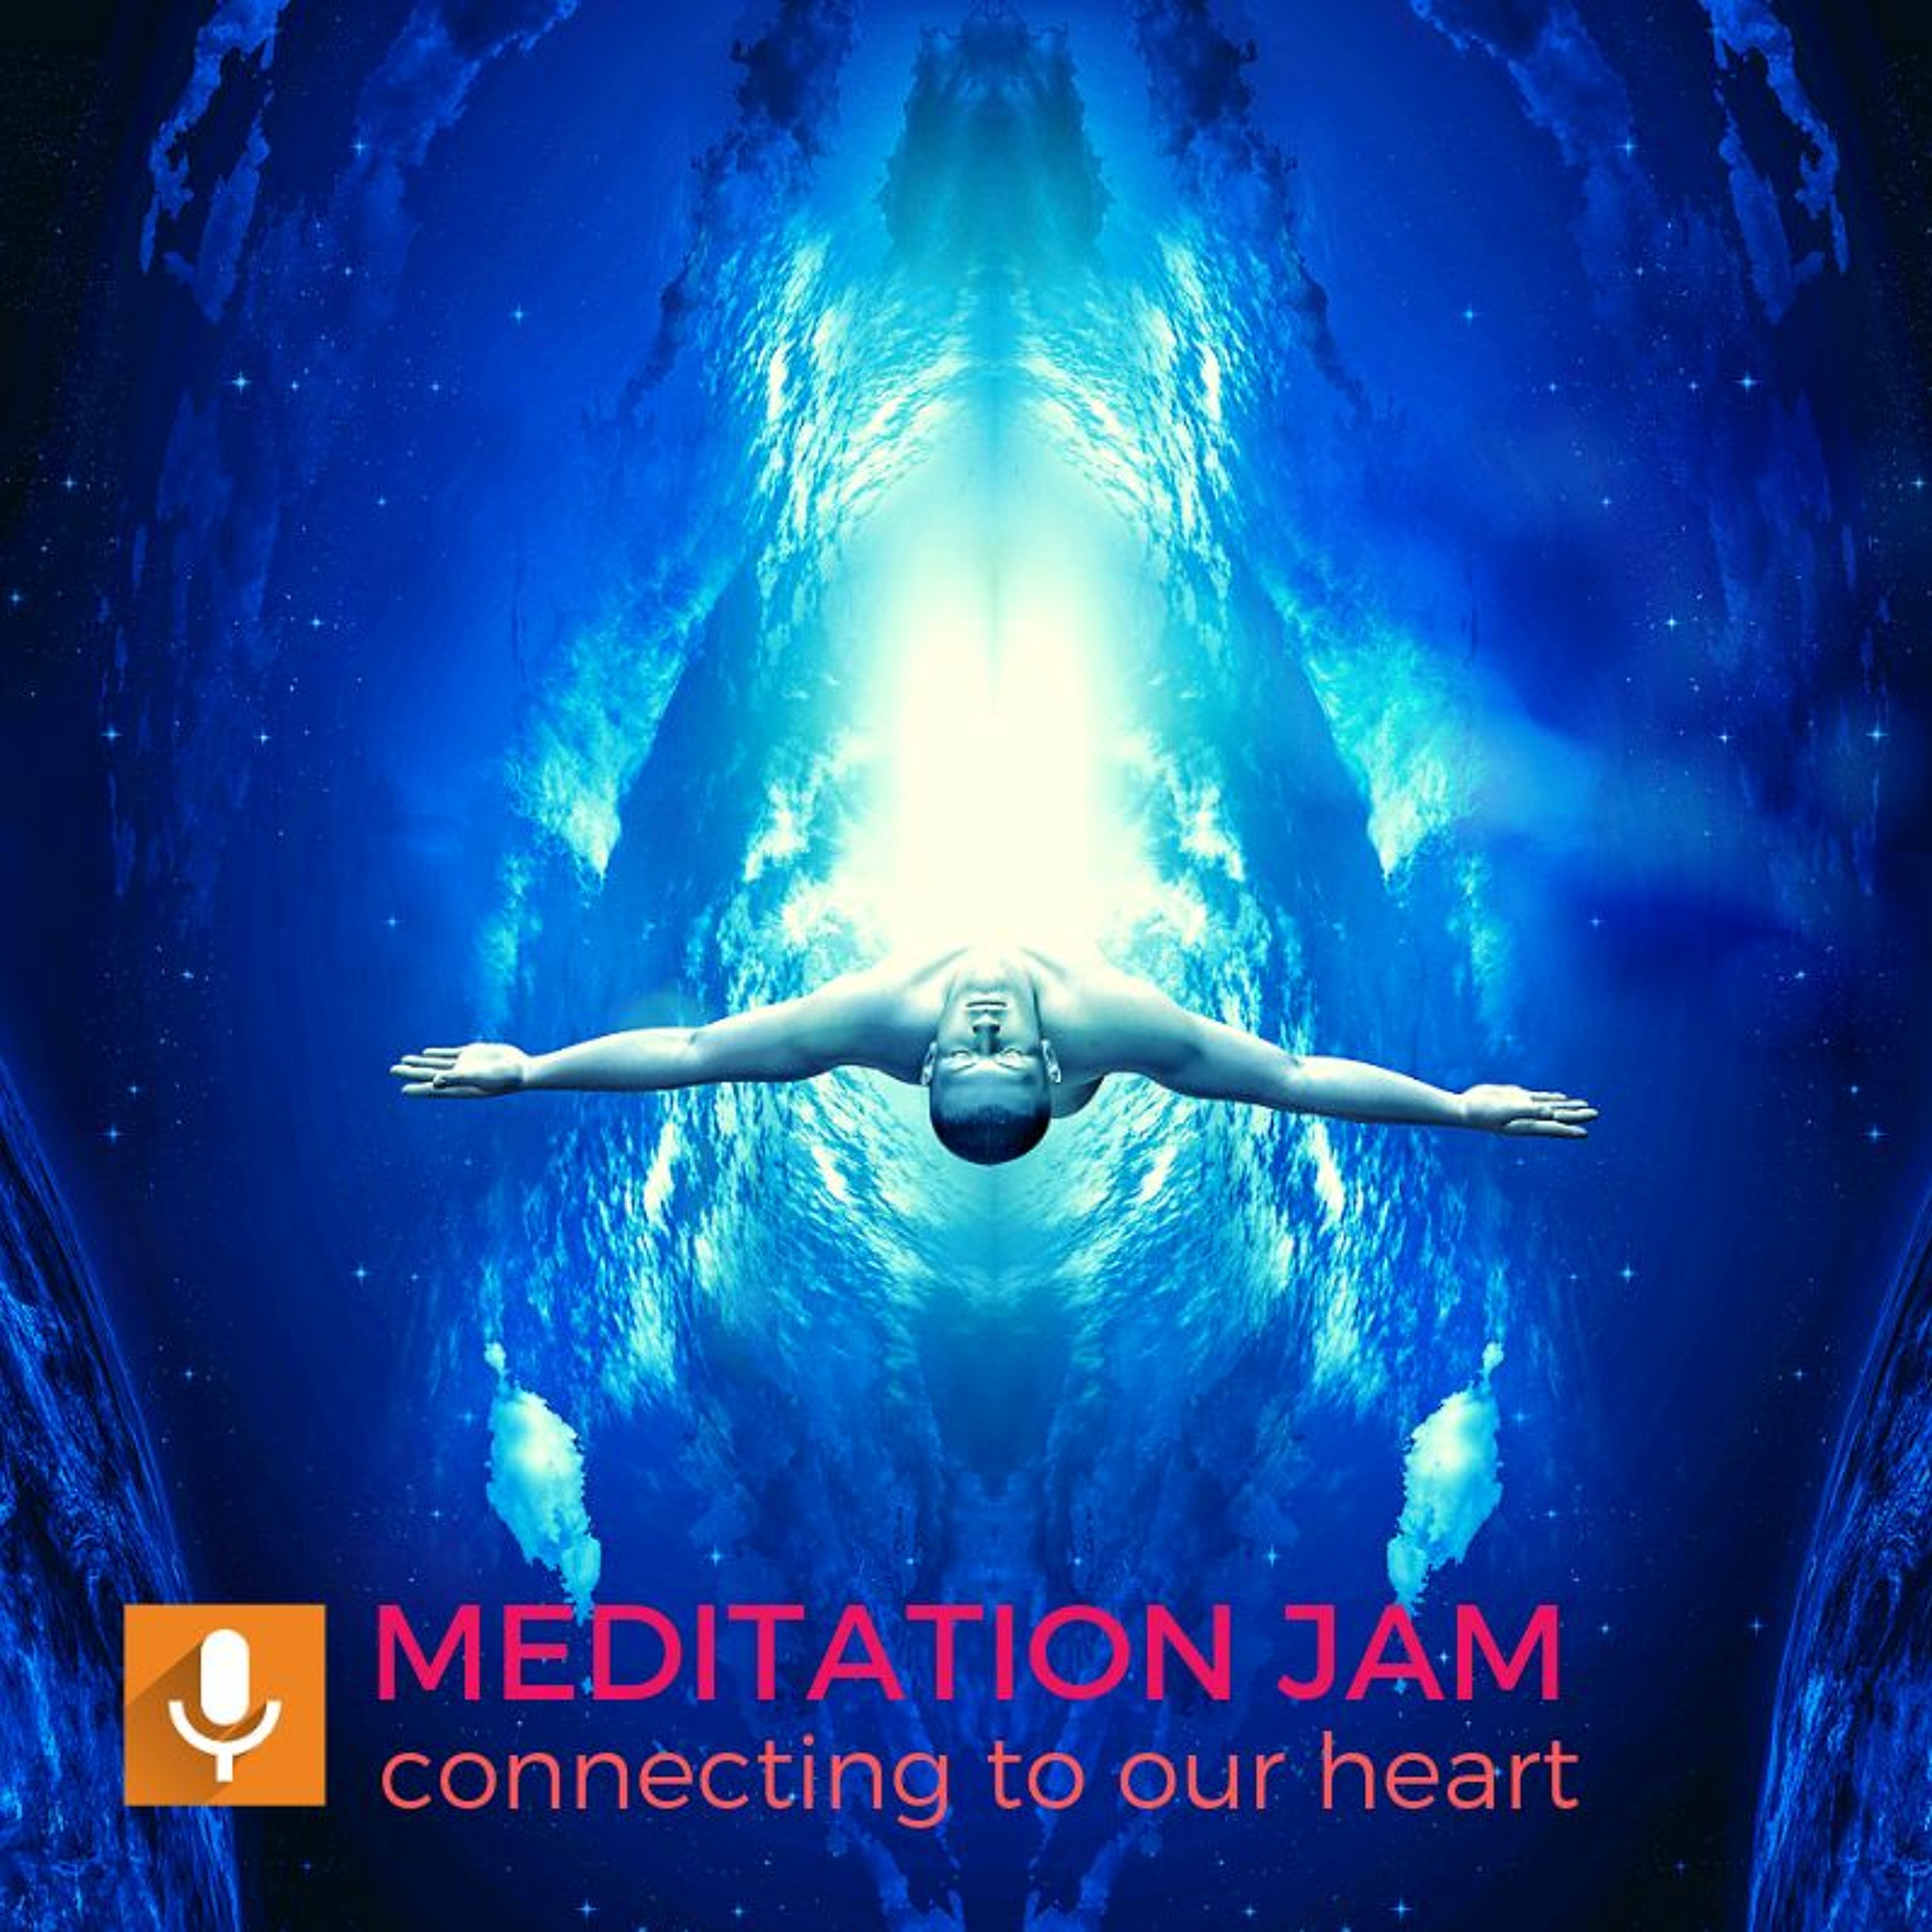 MEDITATION JAM - Connecting to our Heart (2019)